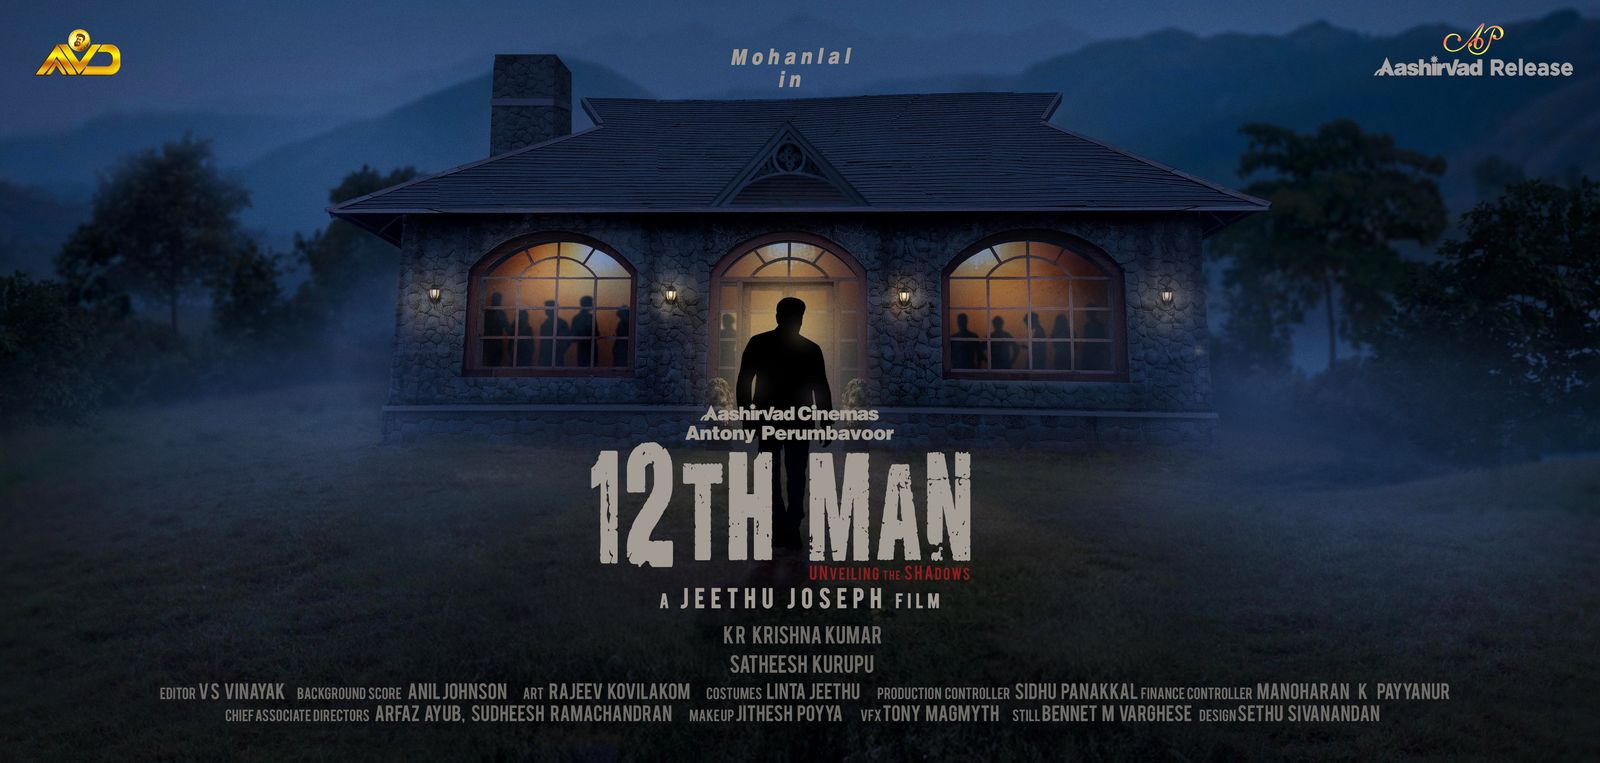 12th Man: Mohanlal joins hands with Drishyam 2 director Jeethu Joseph for his next